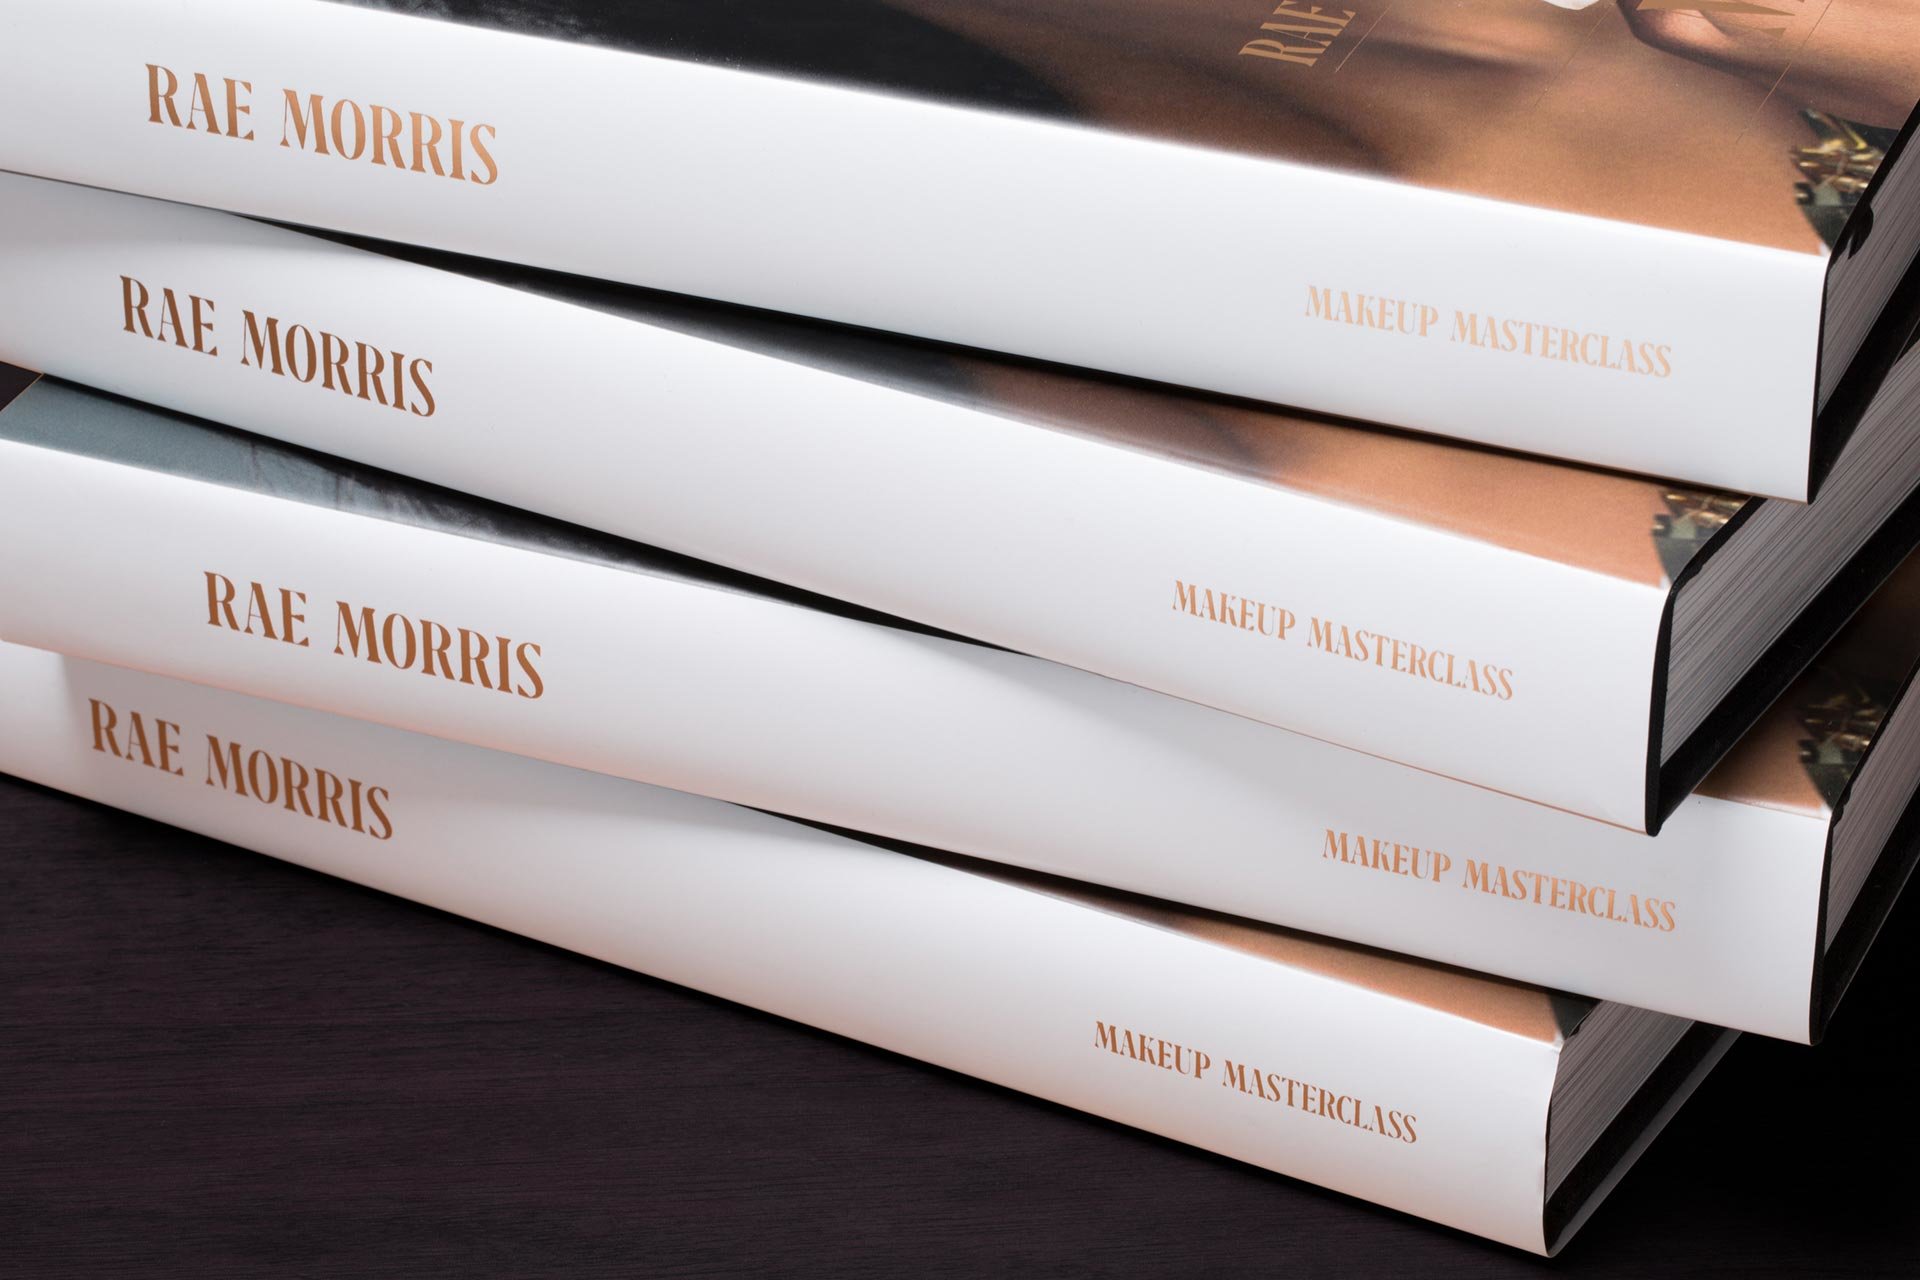 Makeup Masterclass by Rae Morris Book Spine Detail